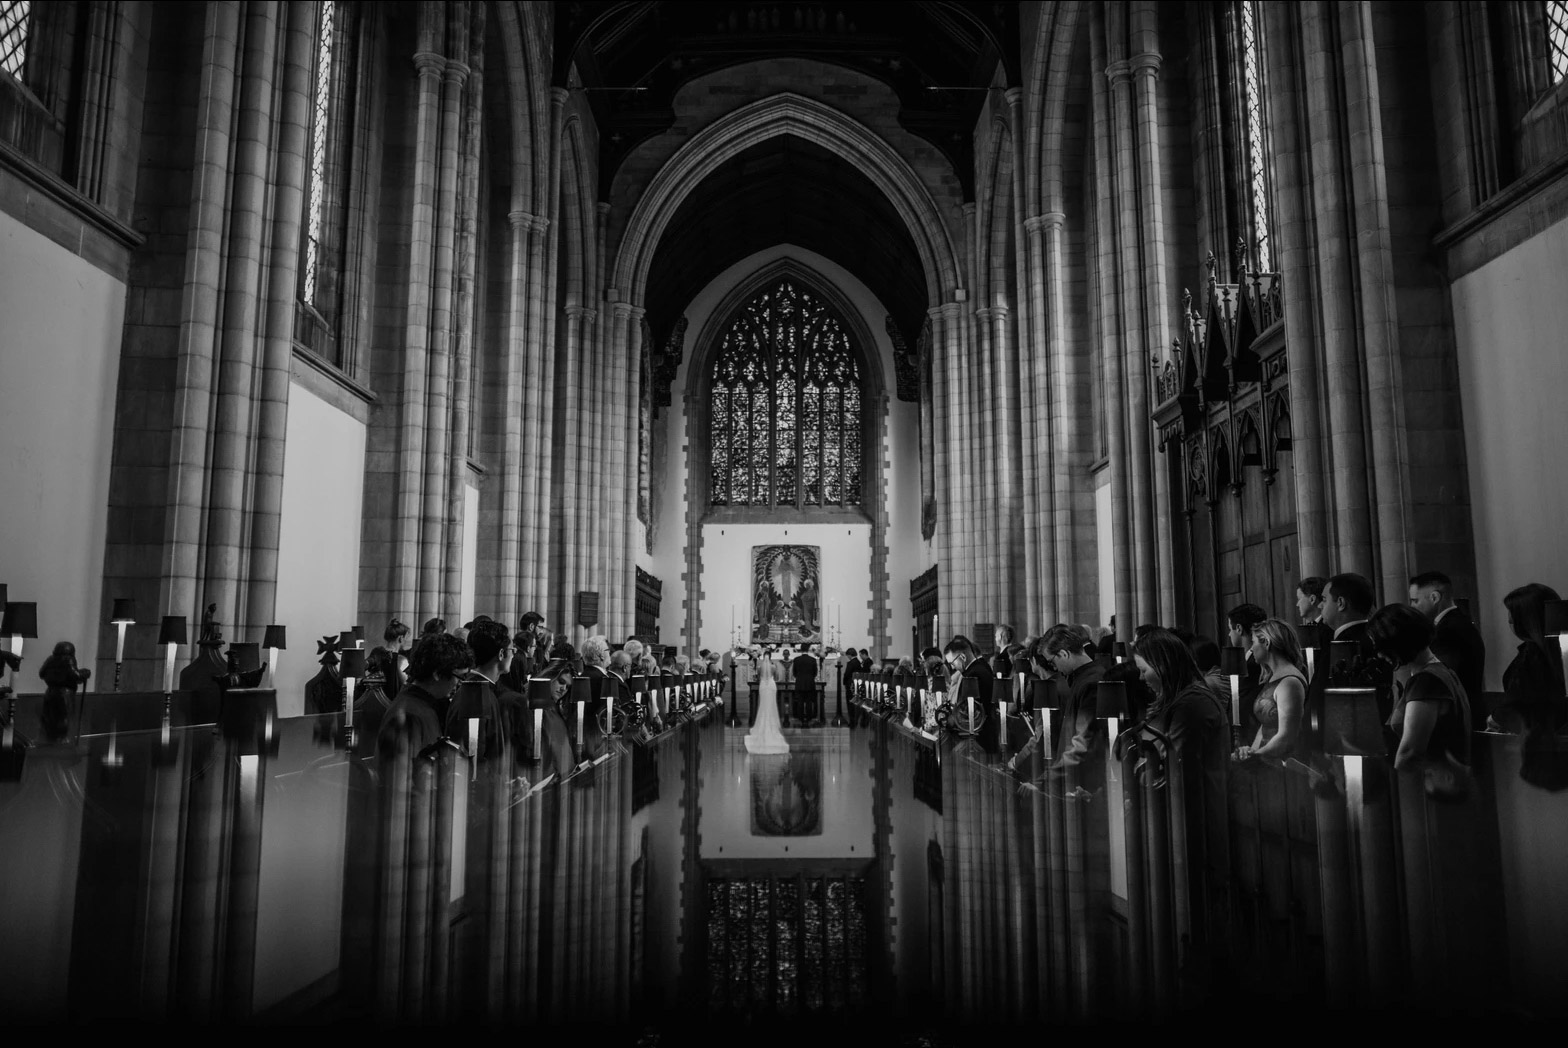 a wedding ceremony taking place in a grand cathedral